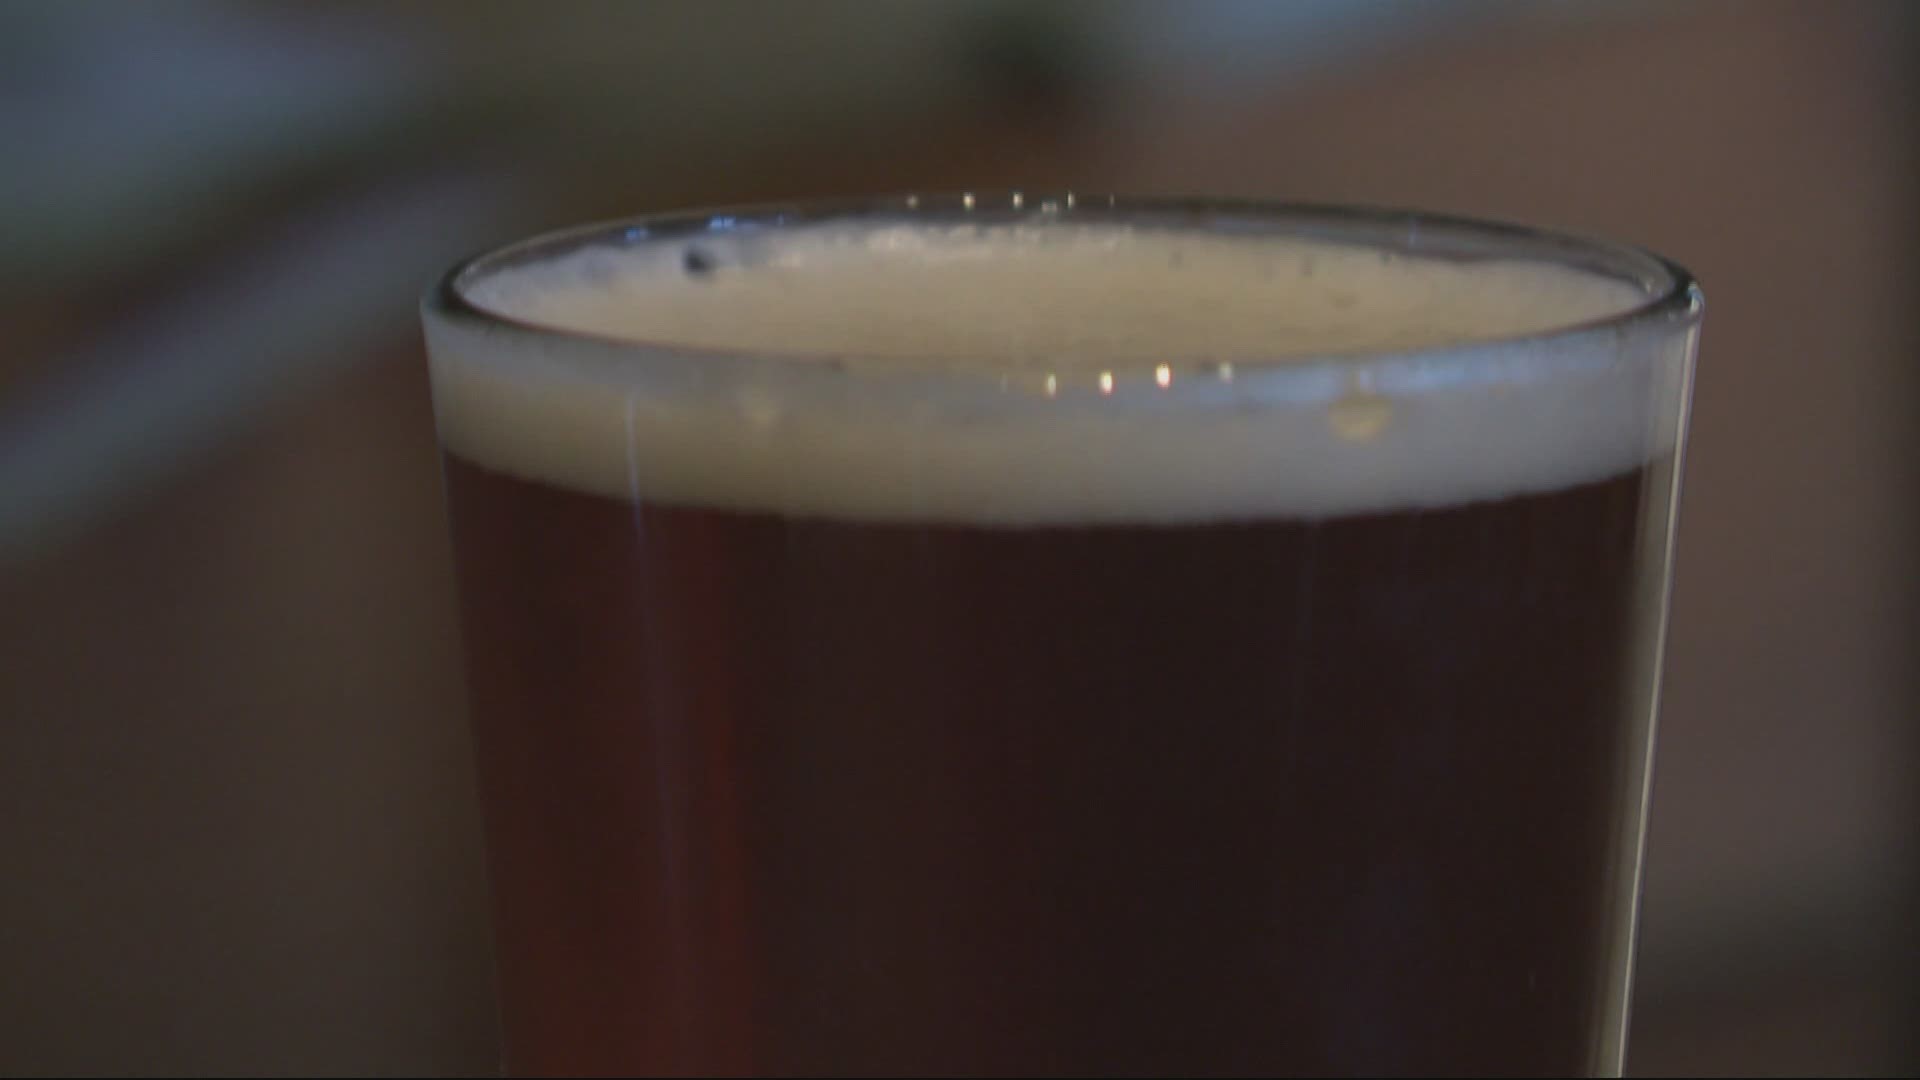 House Bill 3296 would hike taxes on barrels of beer and wine in Oregon. Proponents say the bill would raise money to fight the state's addiction problem.